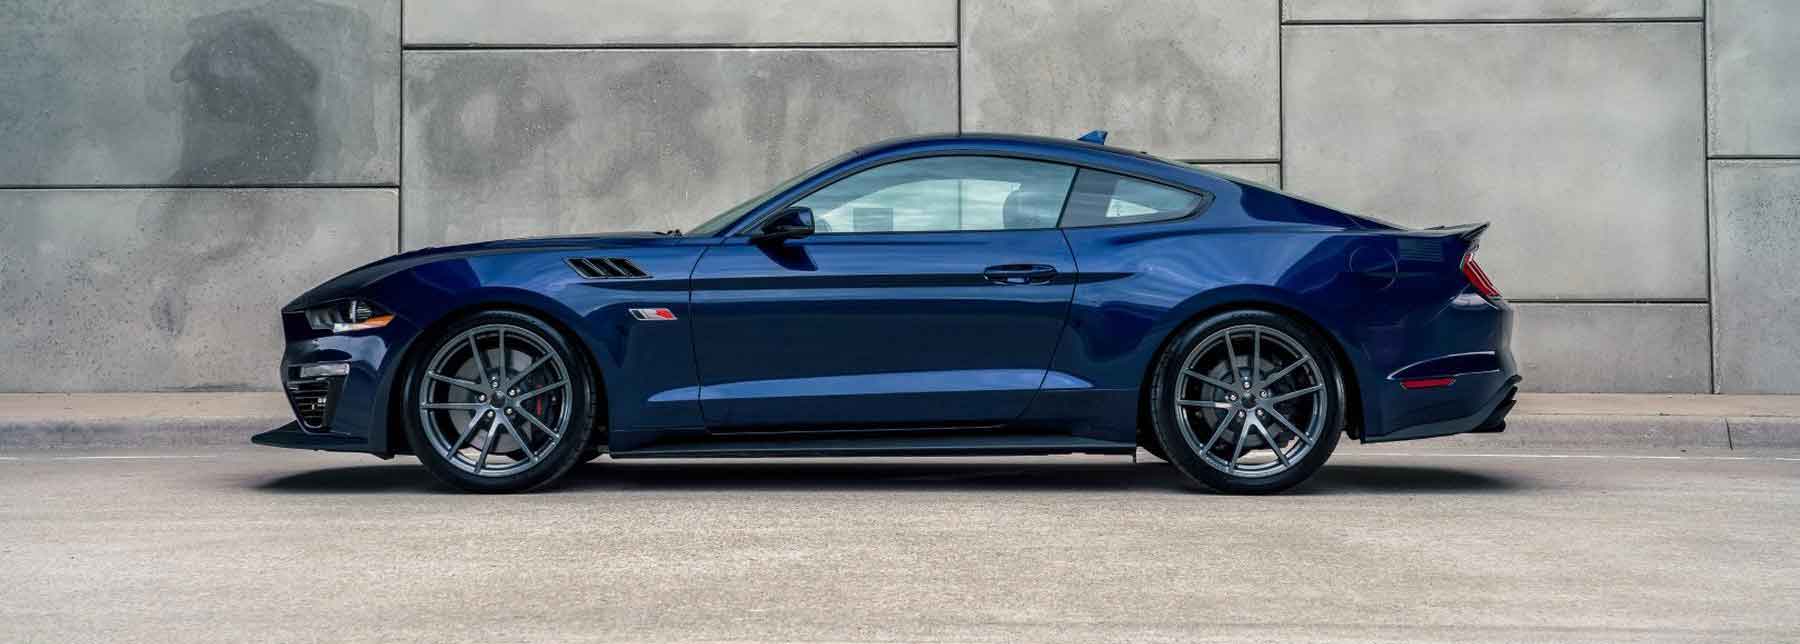 Roush Mustang confirmed for South Africa 